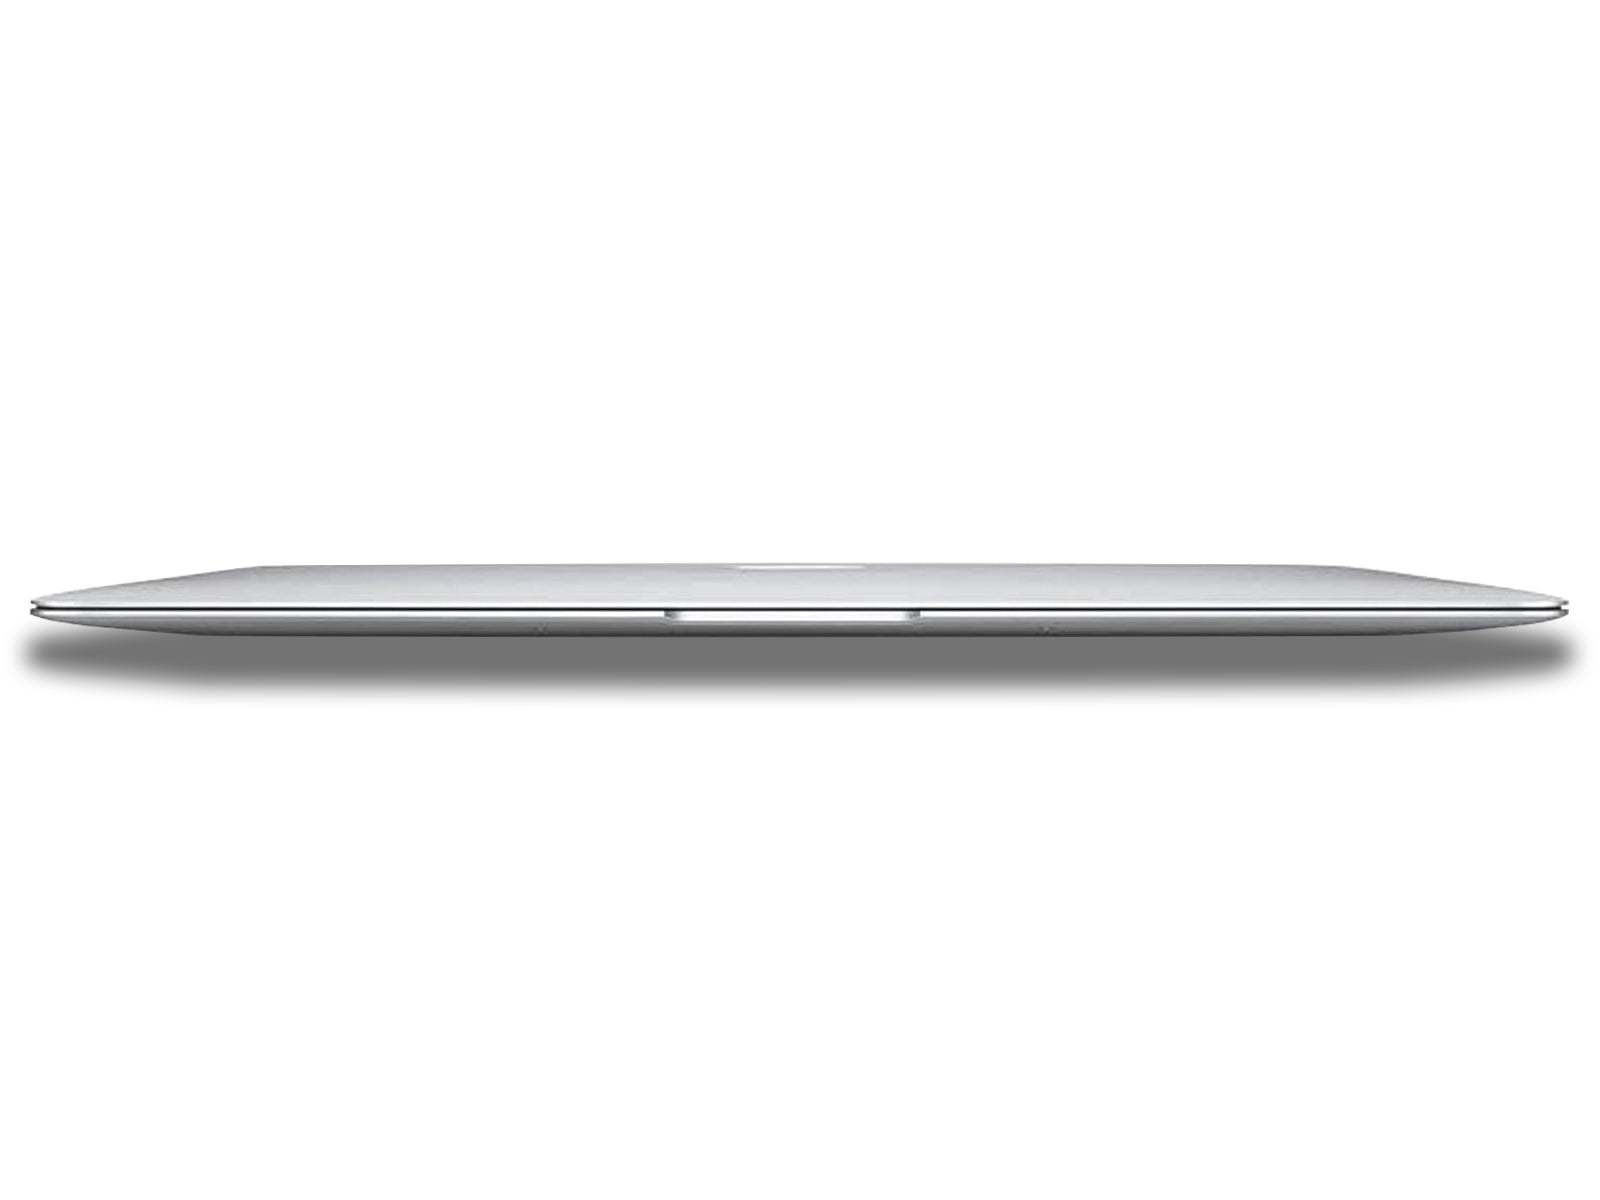 Image shows the front of the closed Apple MacBook Air